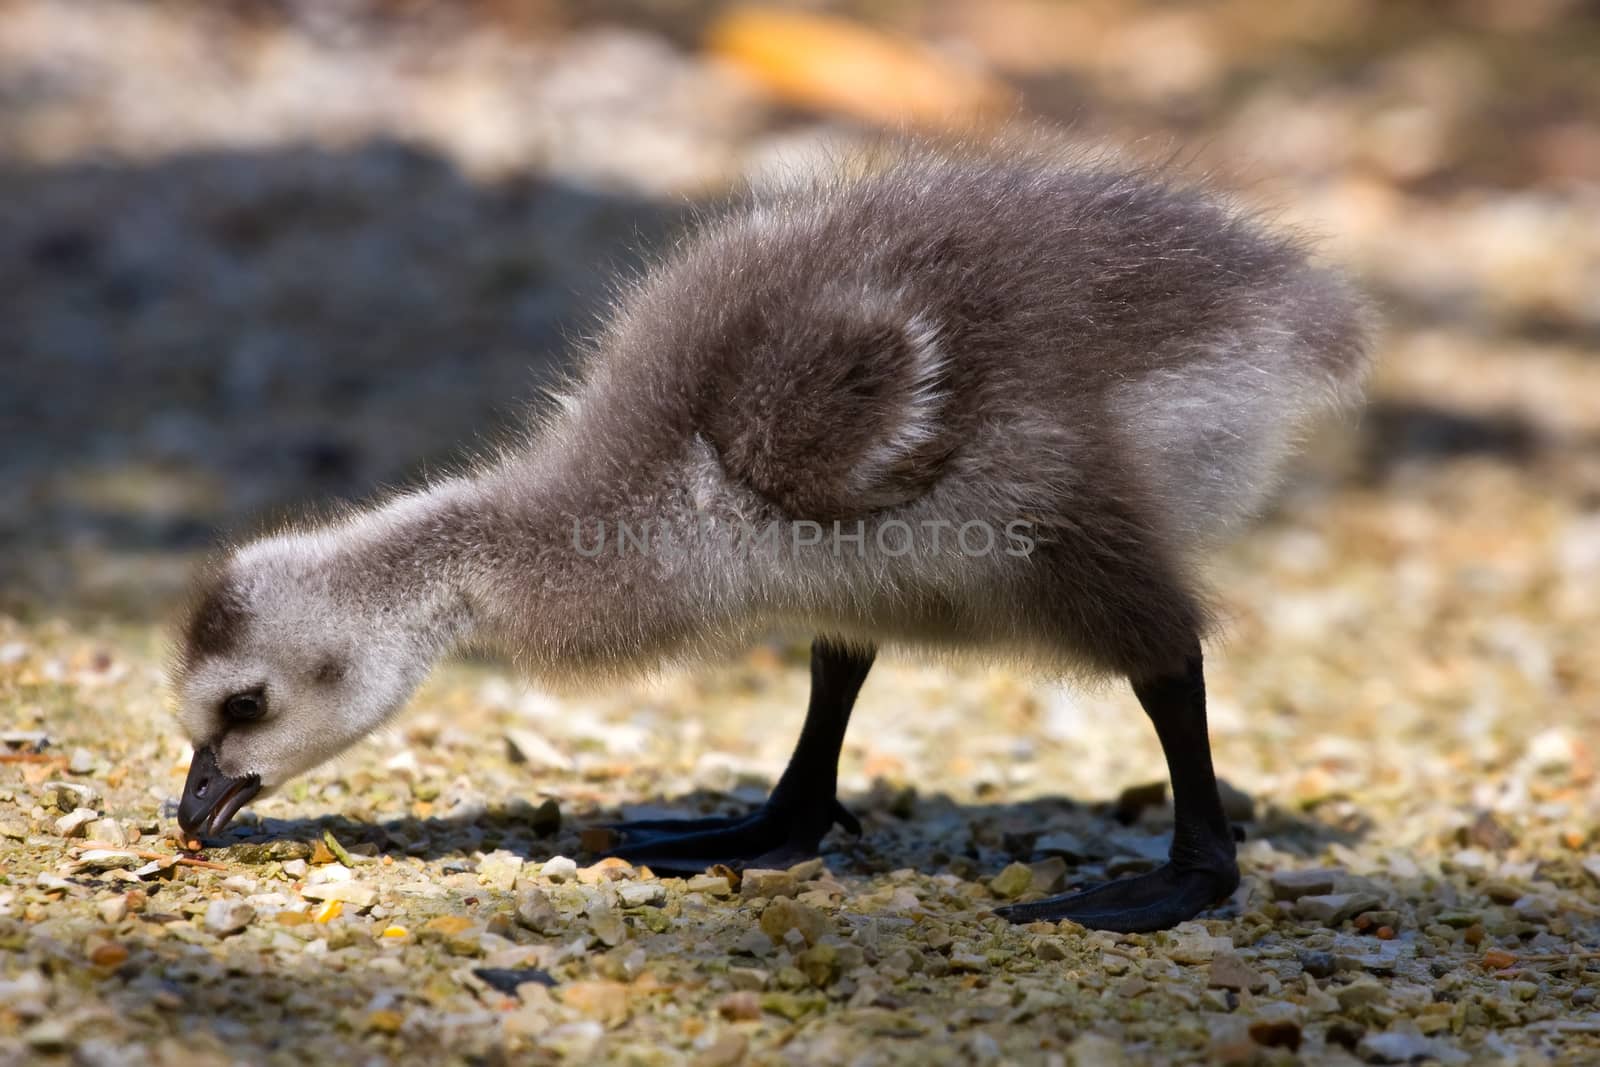 Gosling looking for food on a ground